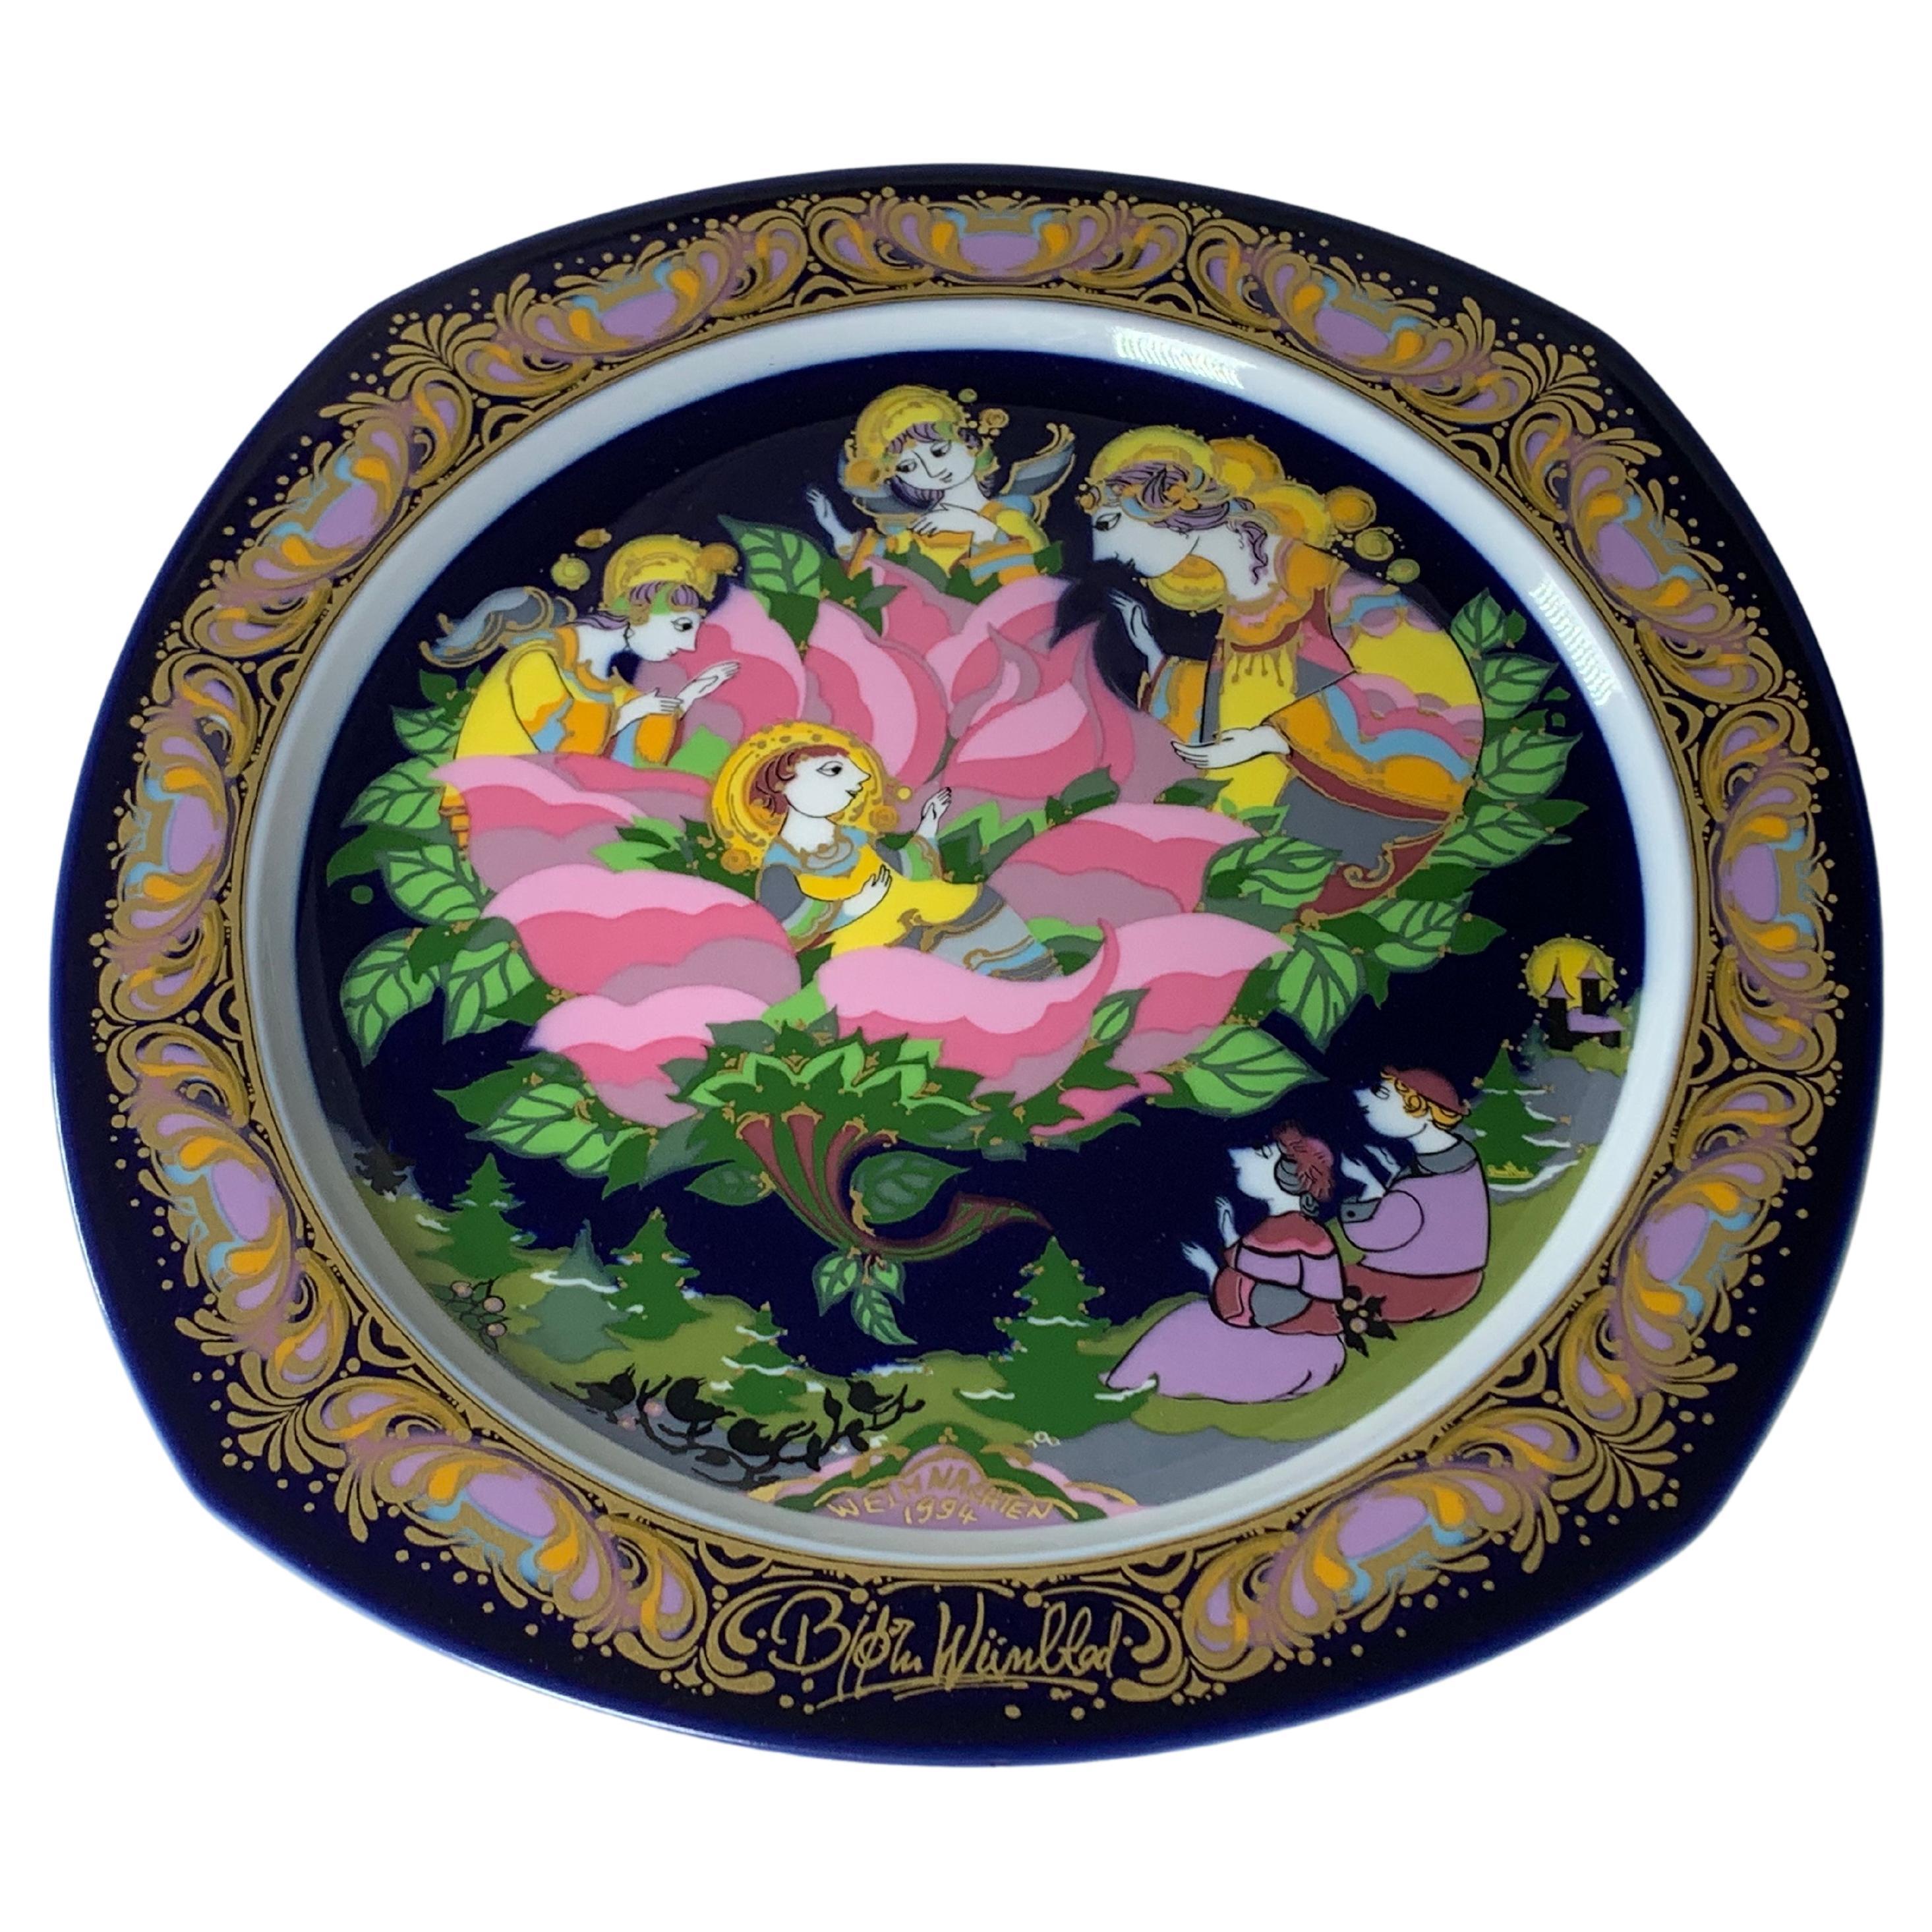 Christmas Songs Plate by Bjorn Wiinblad for Rosenthal from 1994